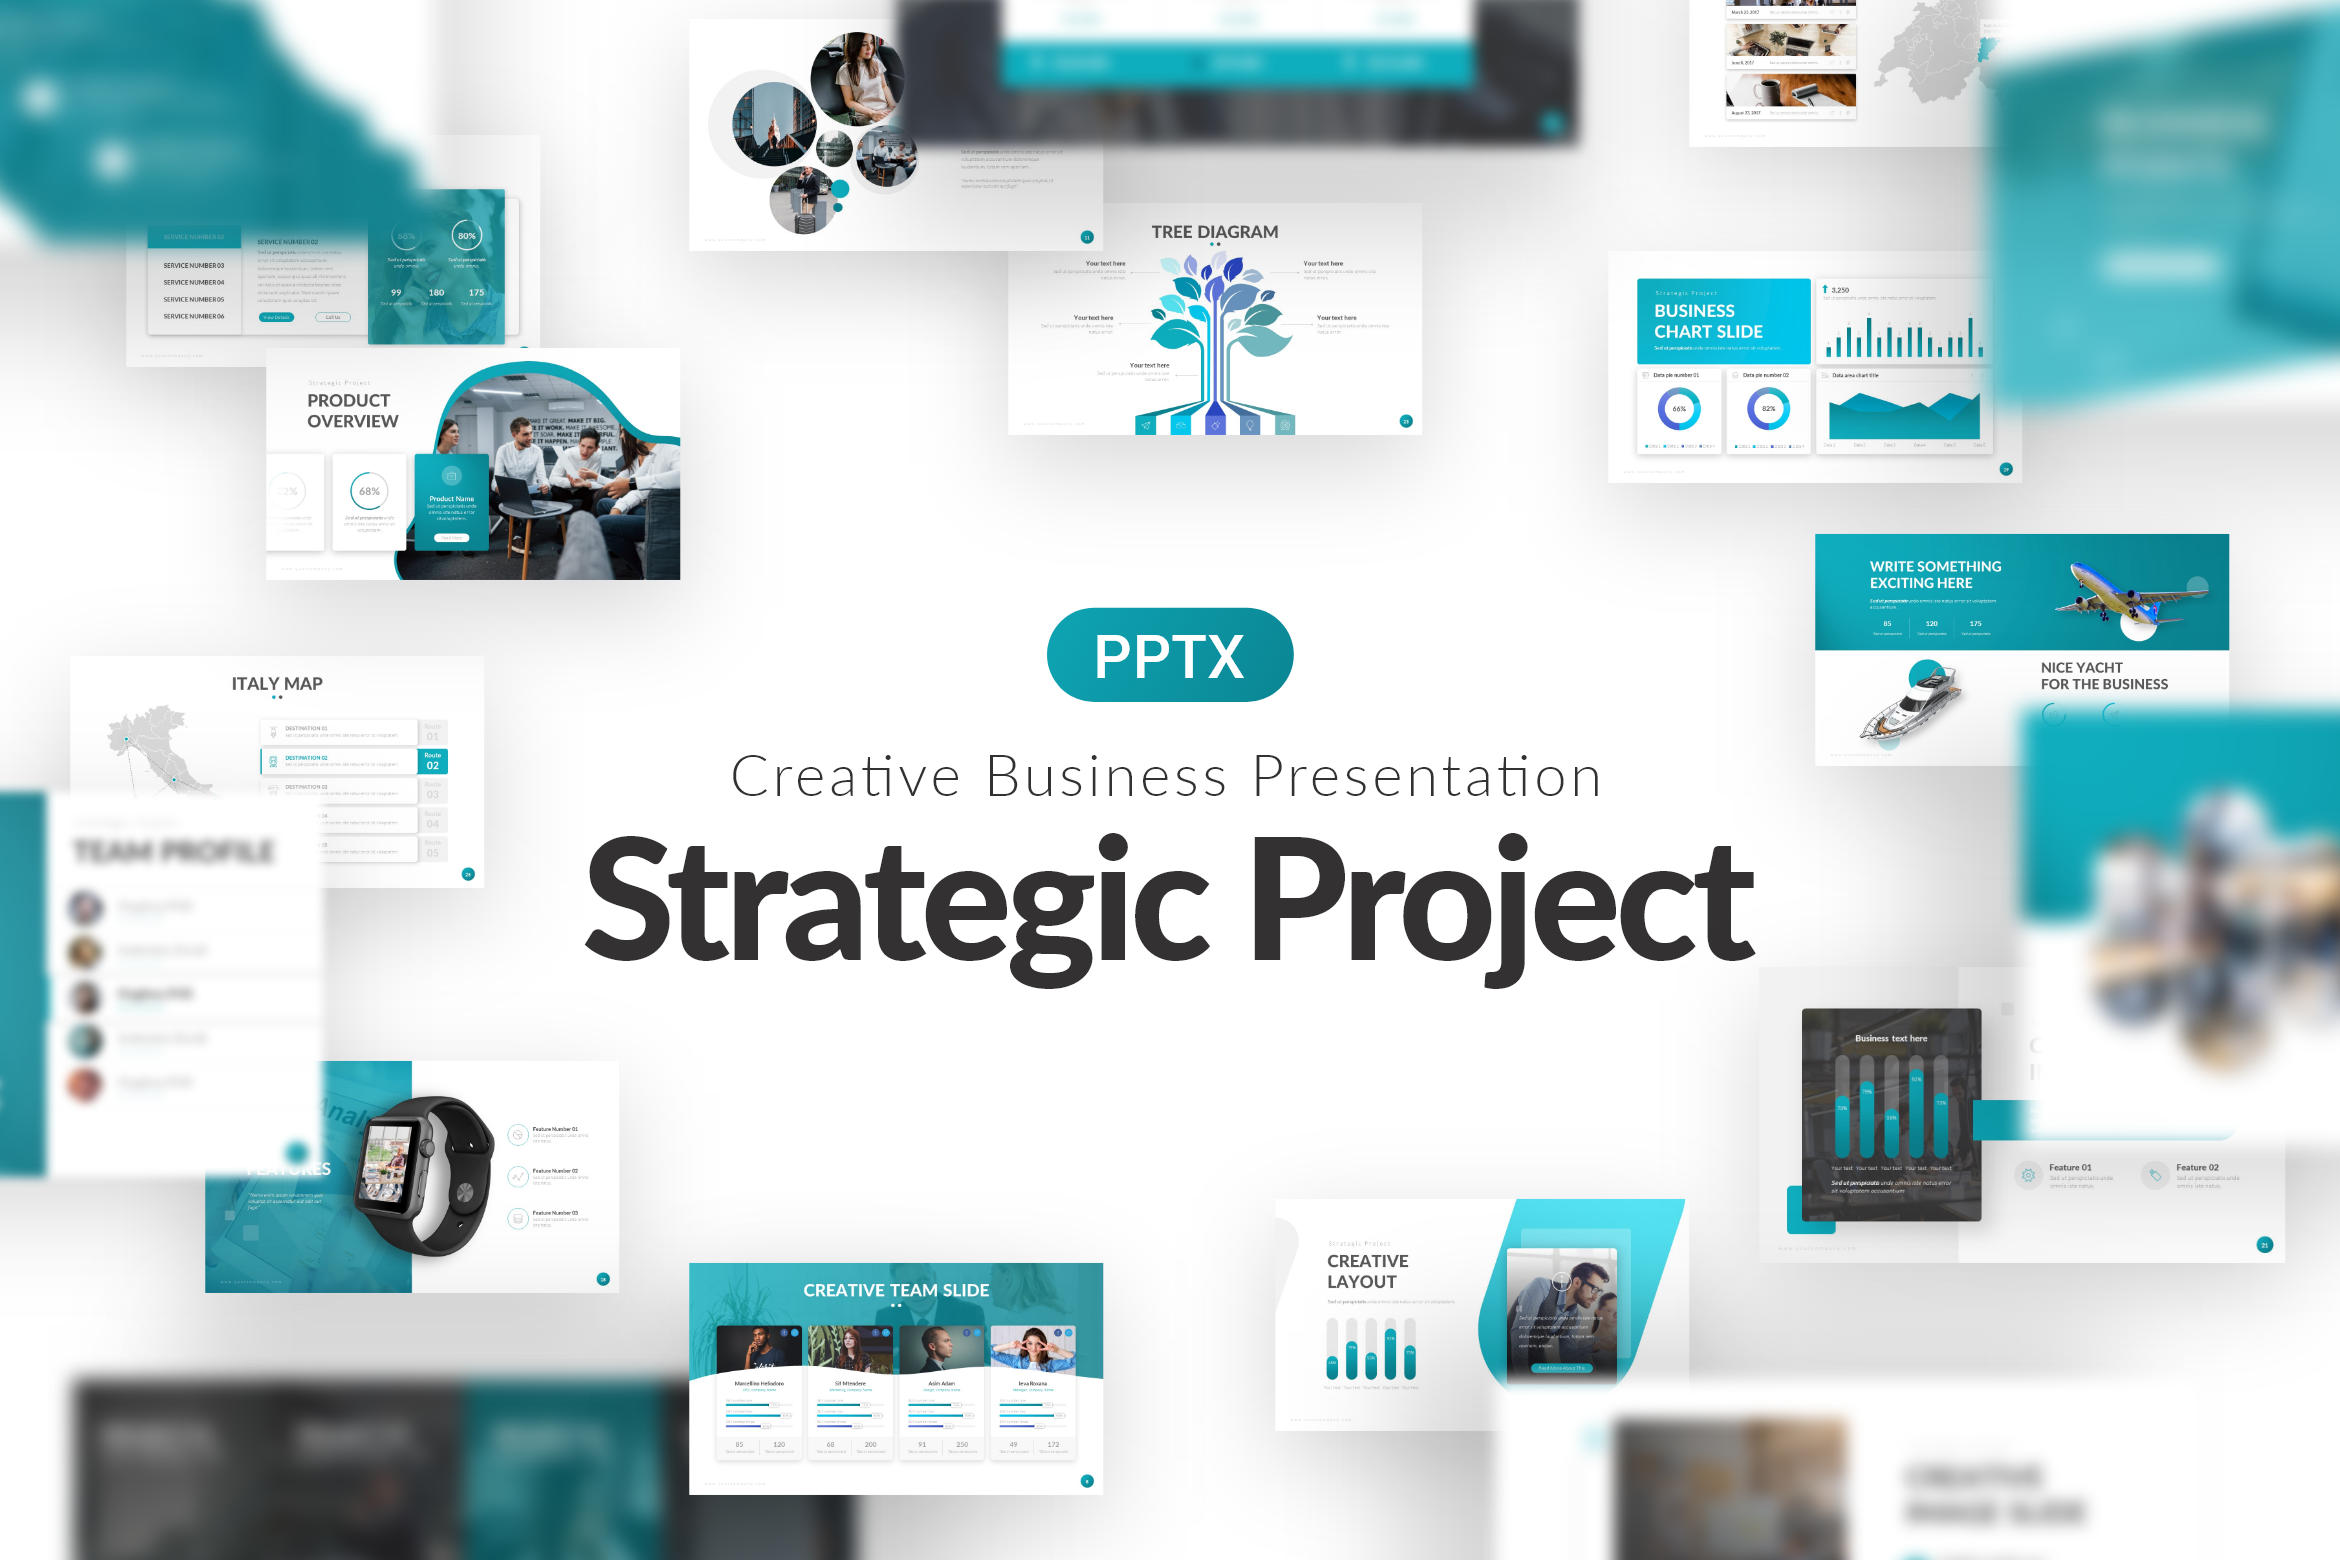 100+ Solid Business Bundle PowerPoint Template